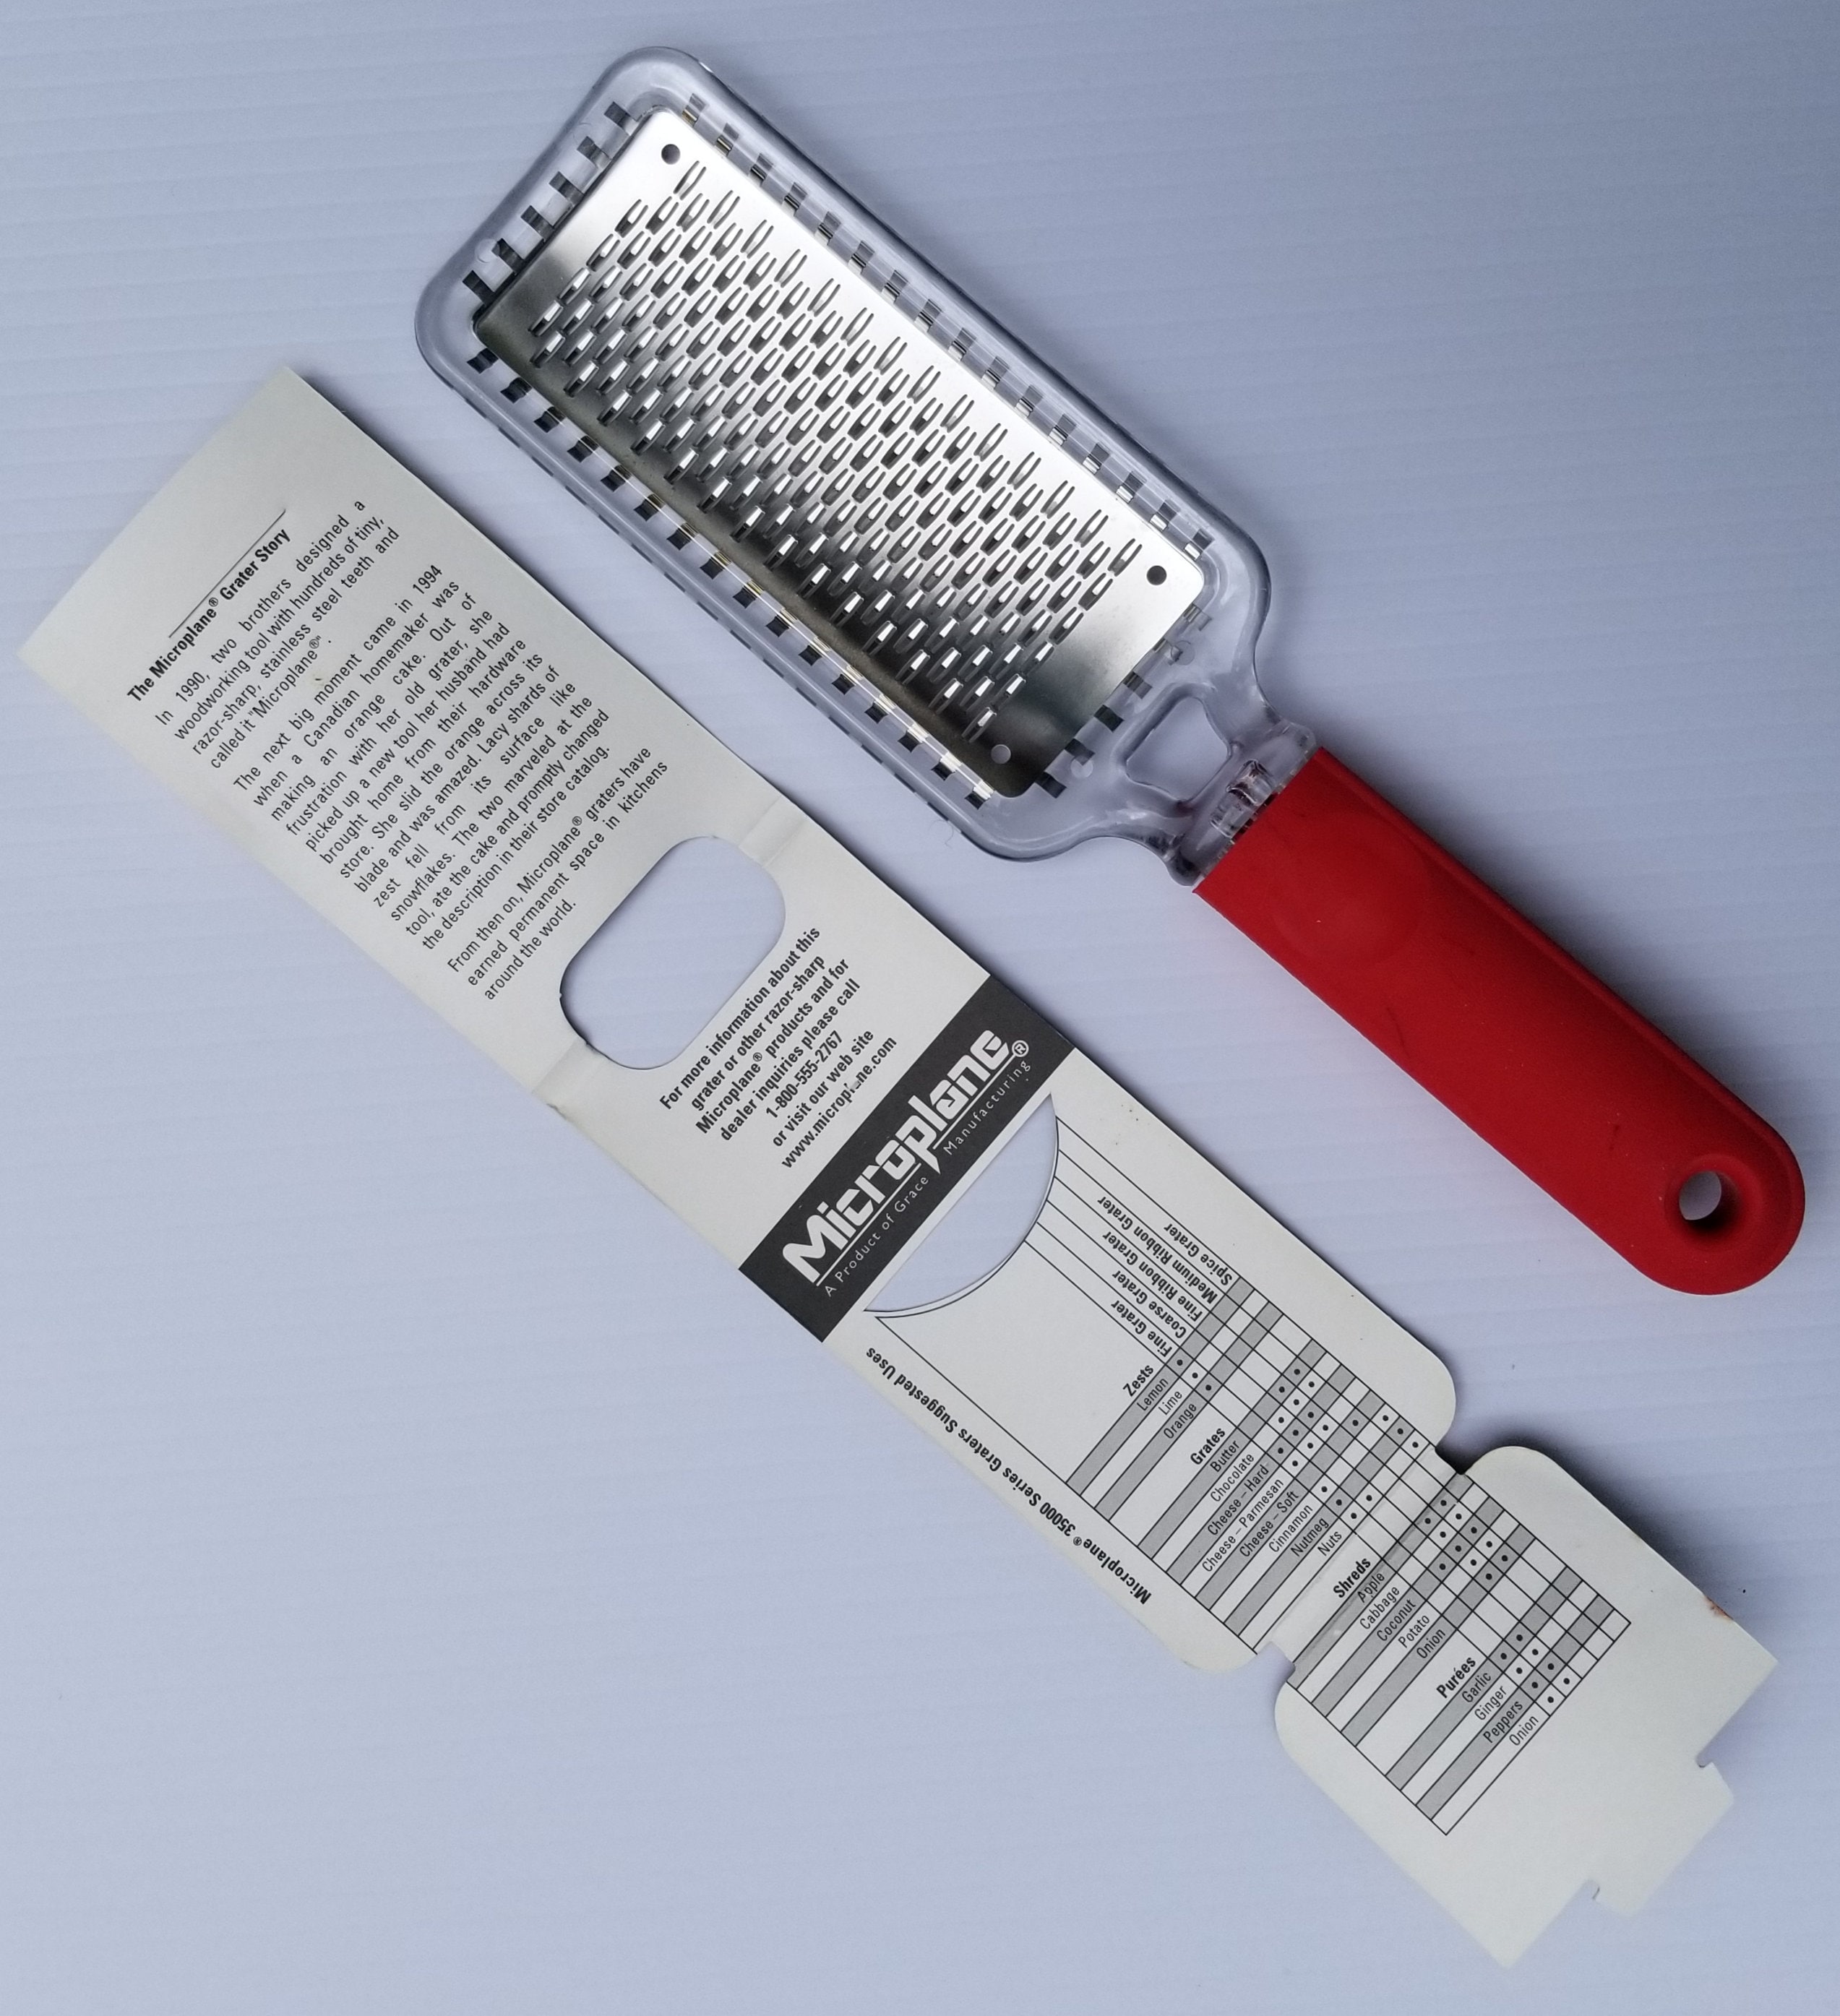 Grace Mfg. Microplane Butter Blade, Red